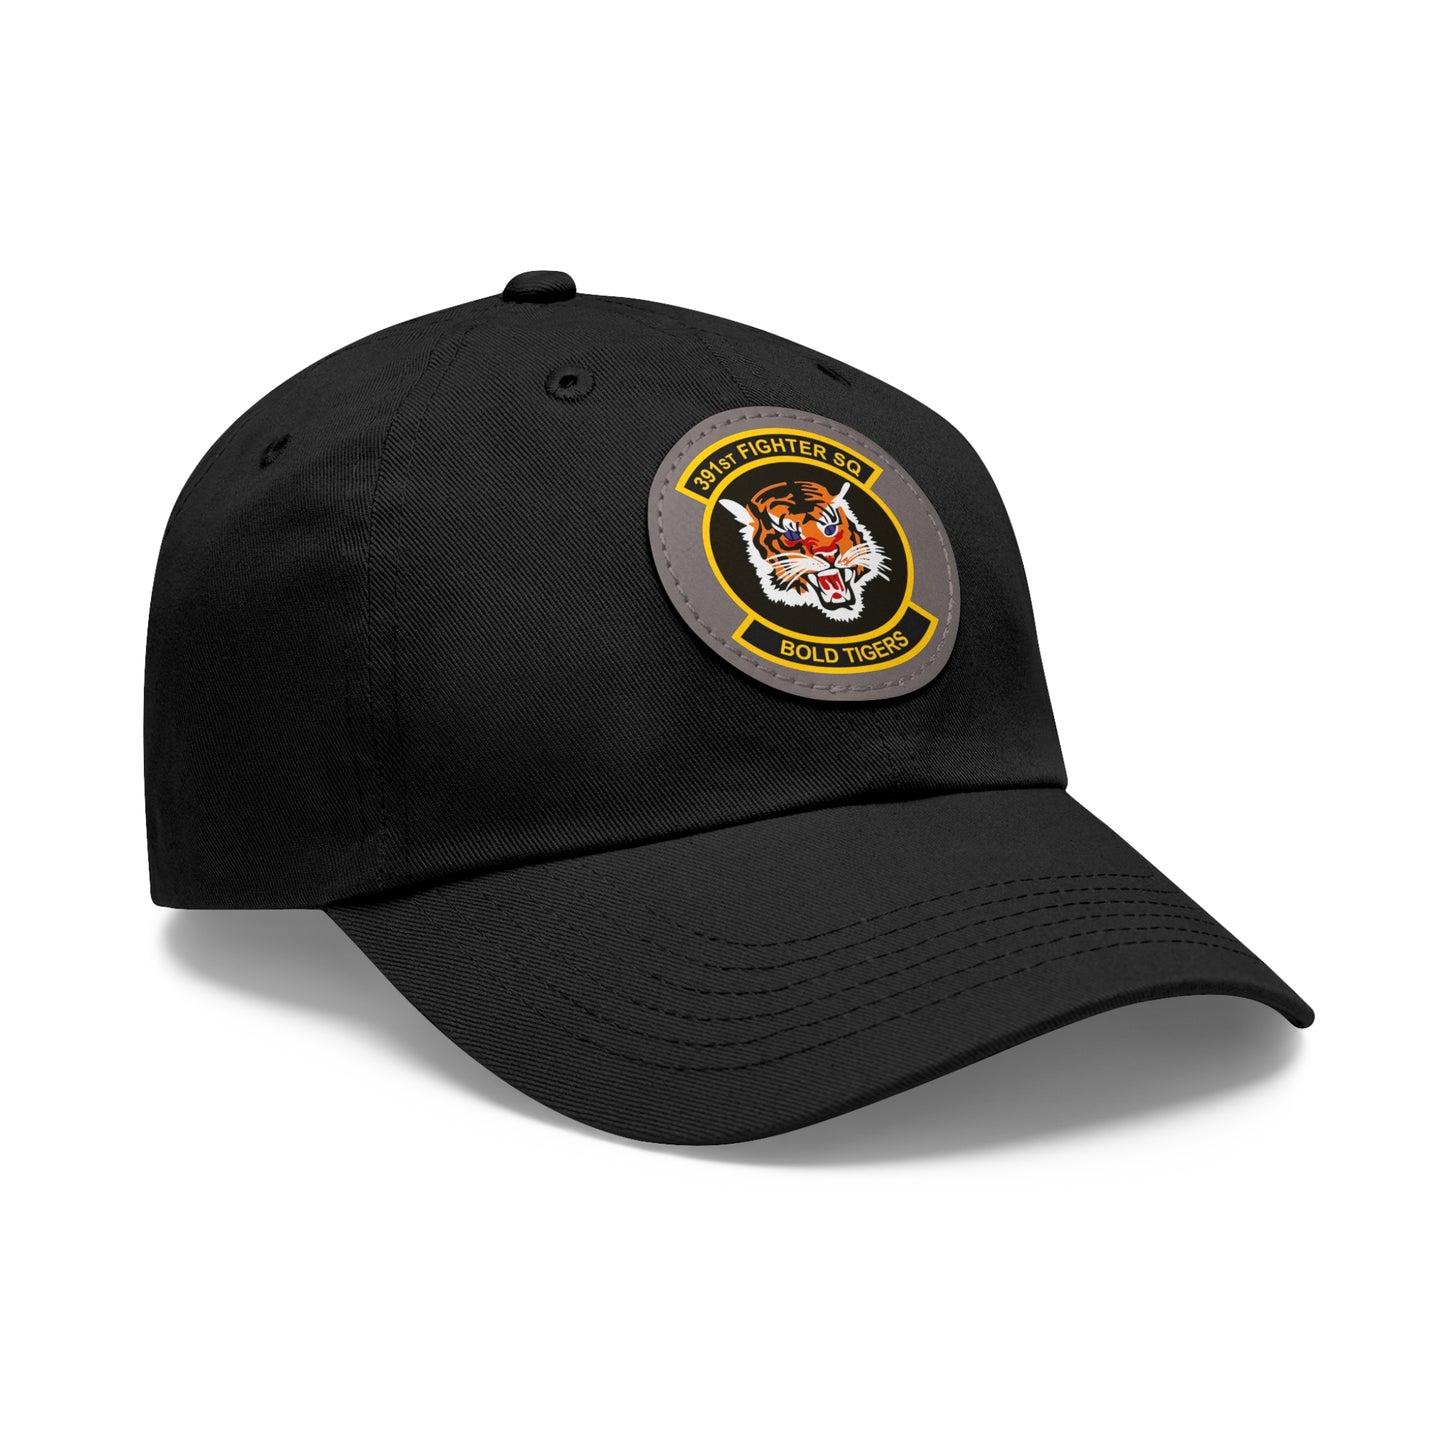 391FS Bold Tigers Leather Patch Hat, Multiple Colors